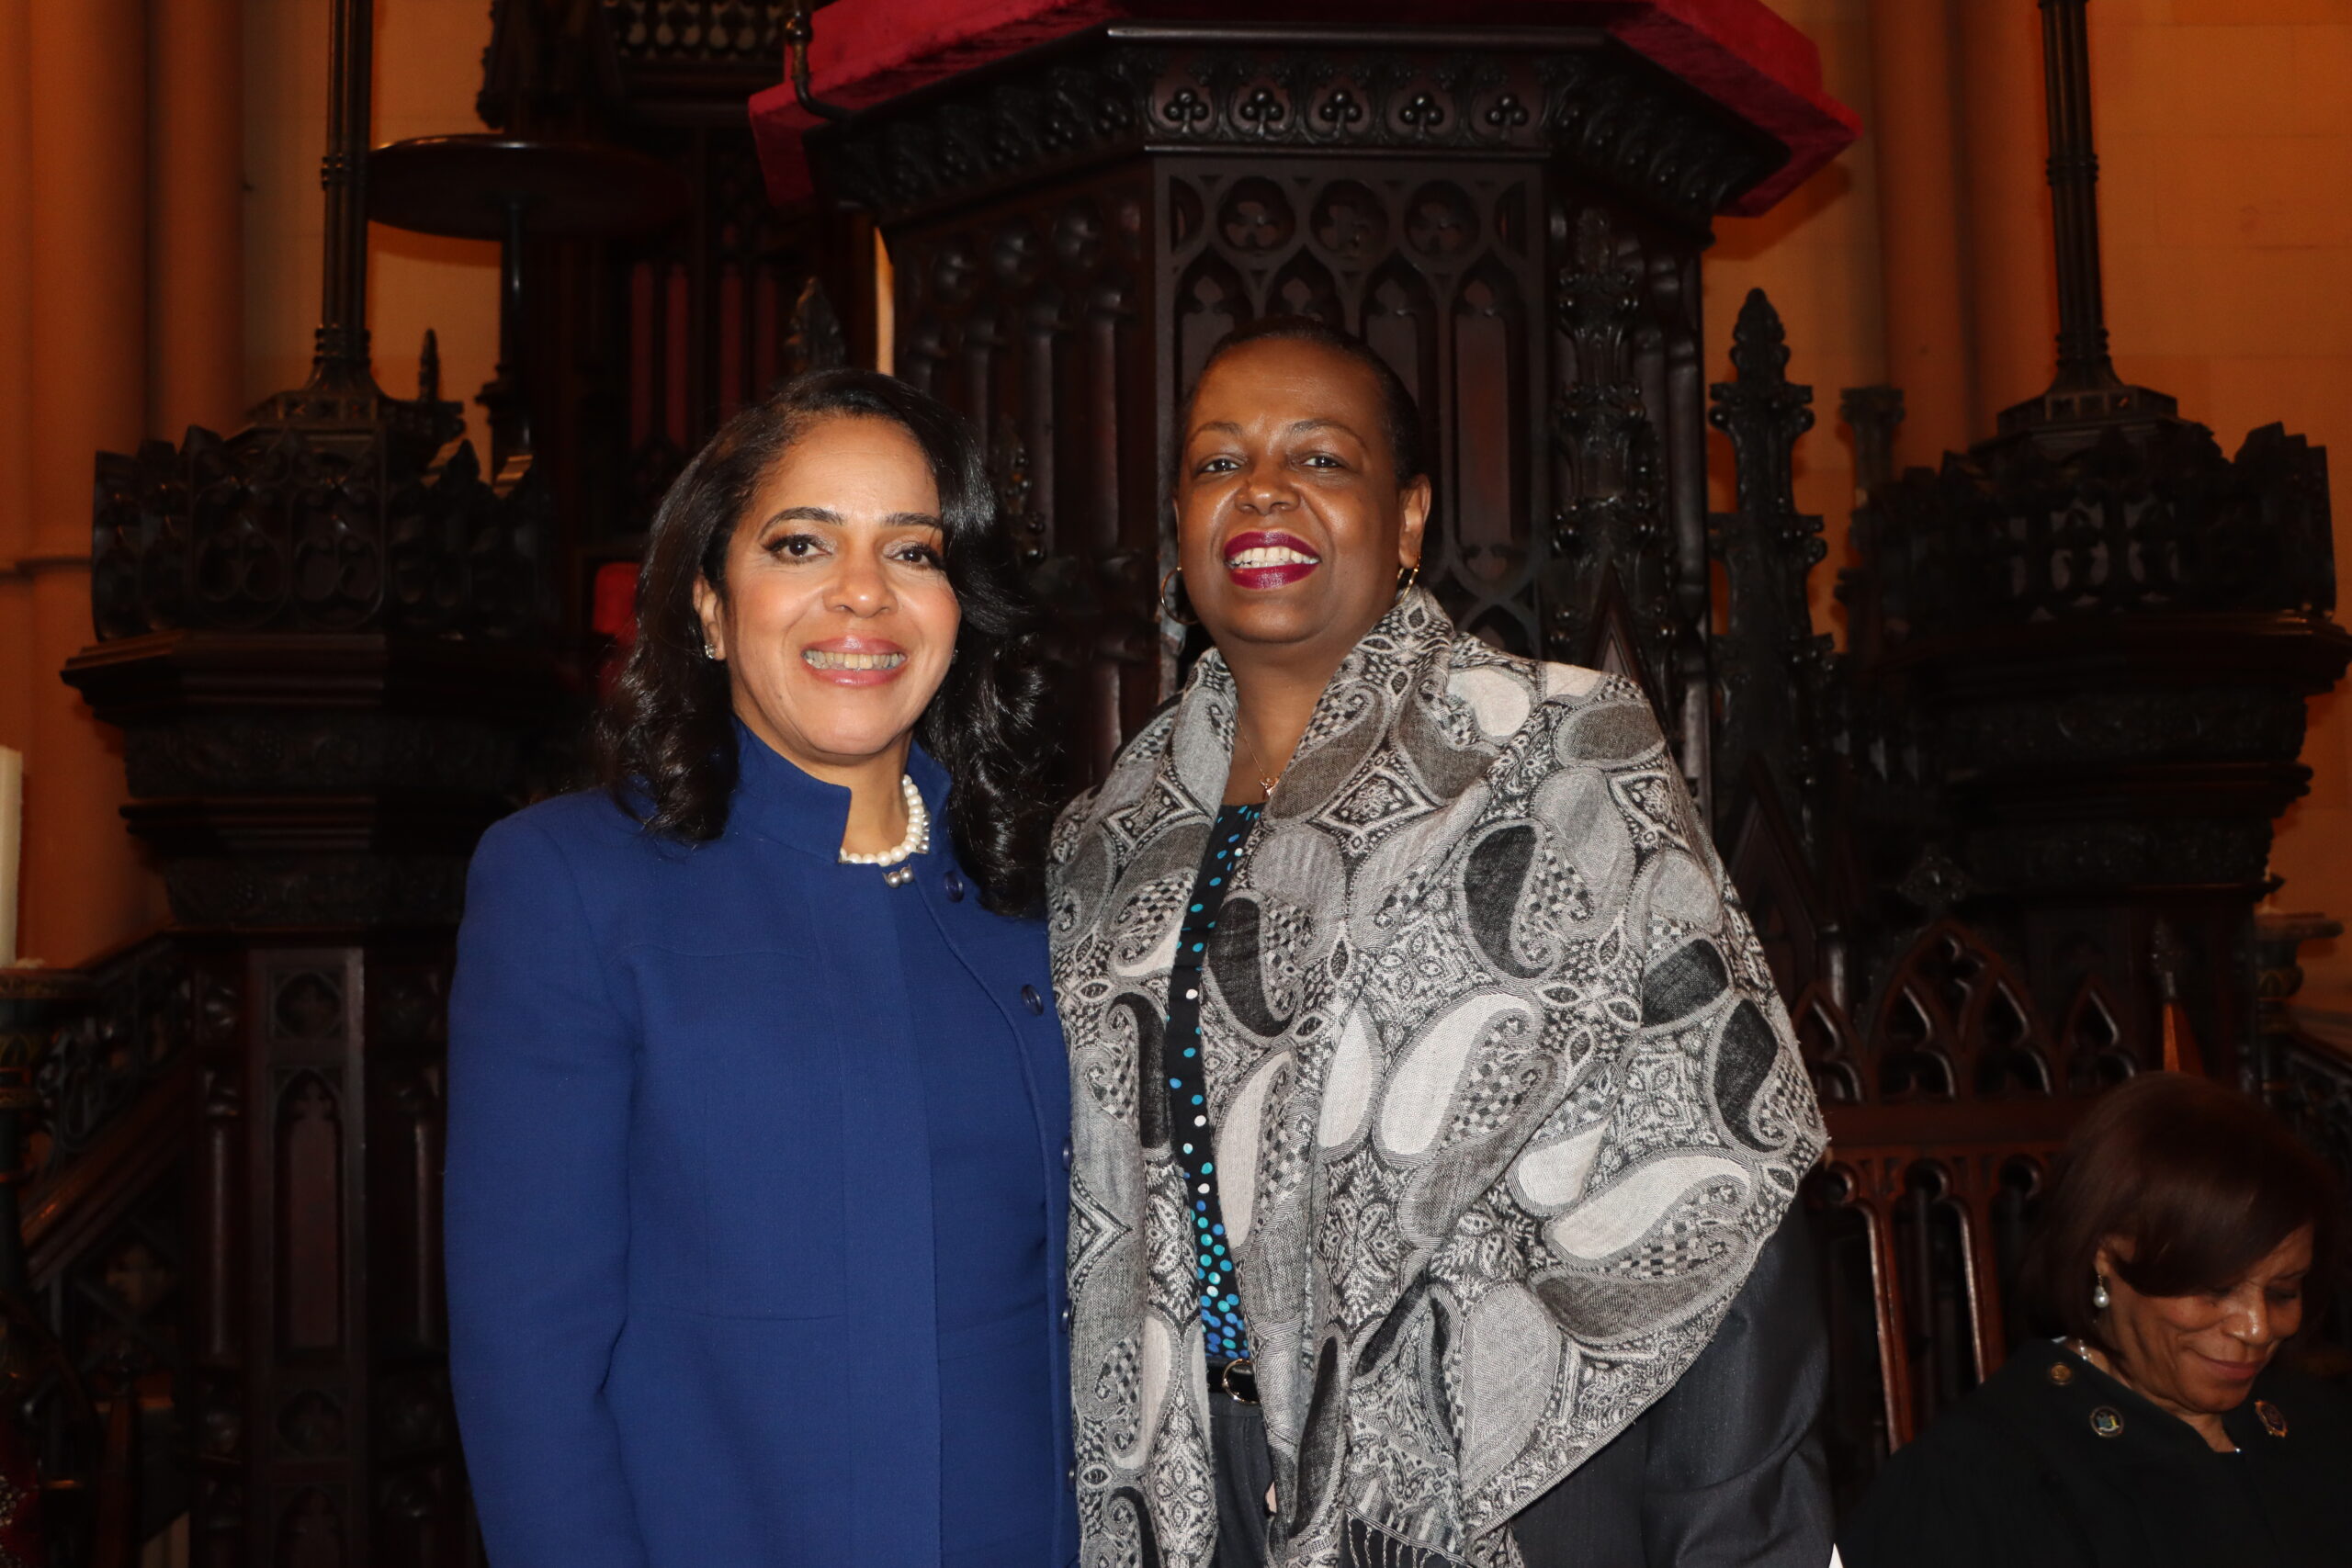 Linda Wilson stands alongside Justice Marguerite A. Grays, administrative judge, Civil Term, 11th Judicial District presiding justice – Commercial Division, Queens County at Linda Wilson's swearing-in.